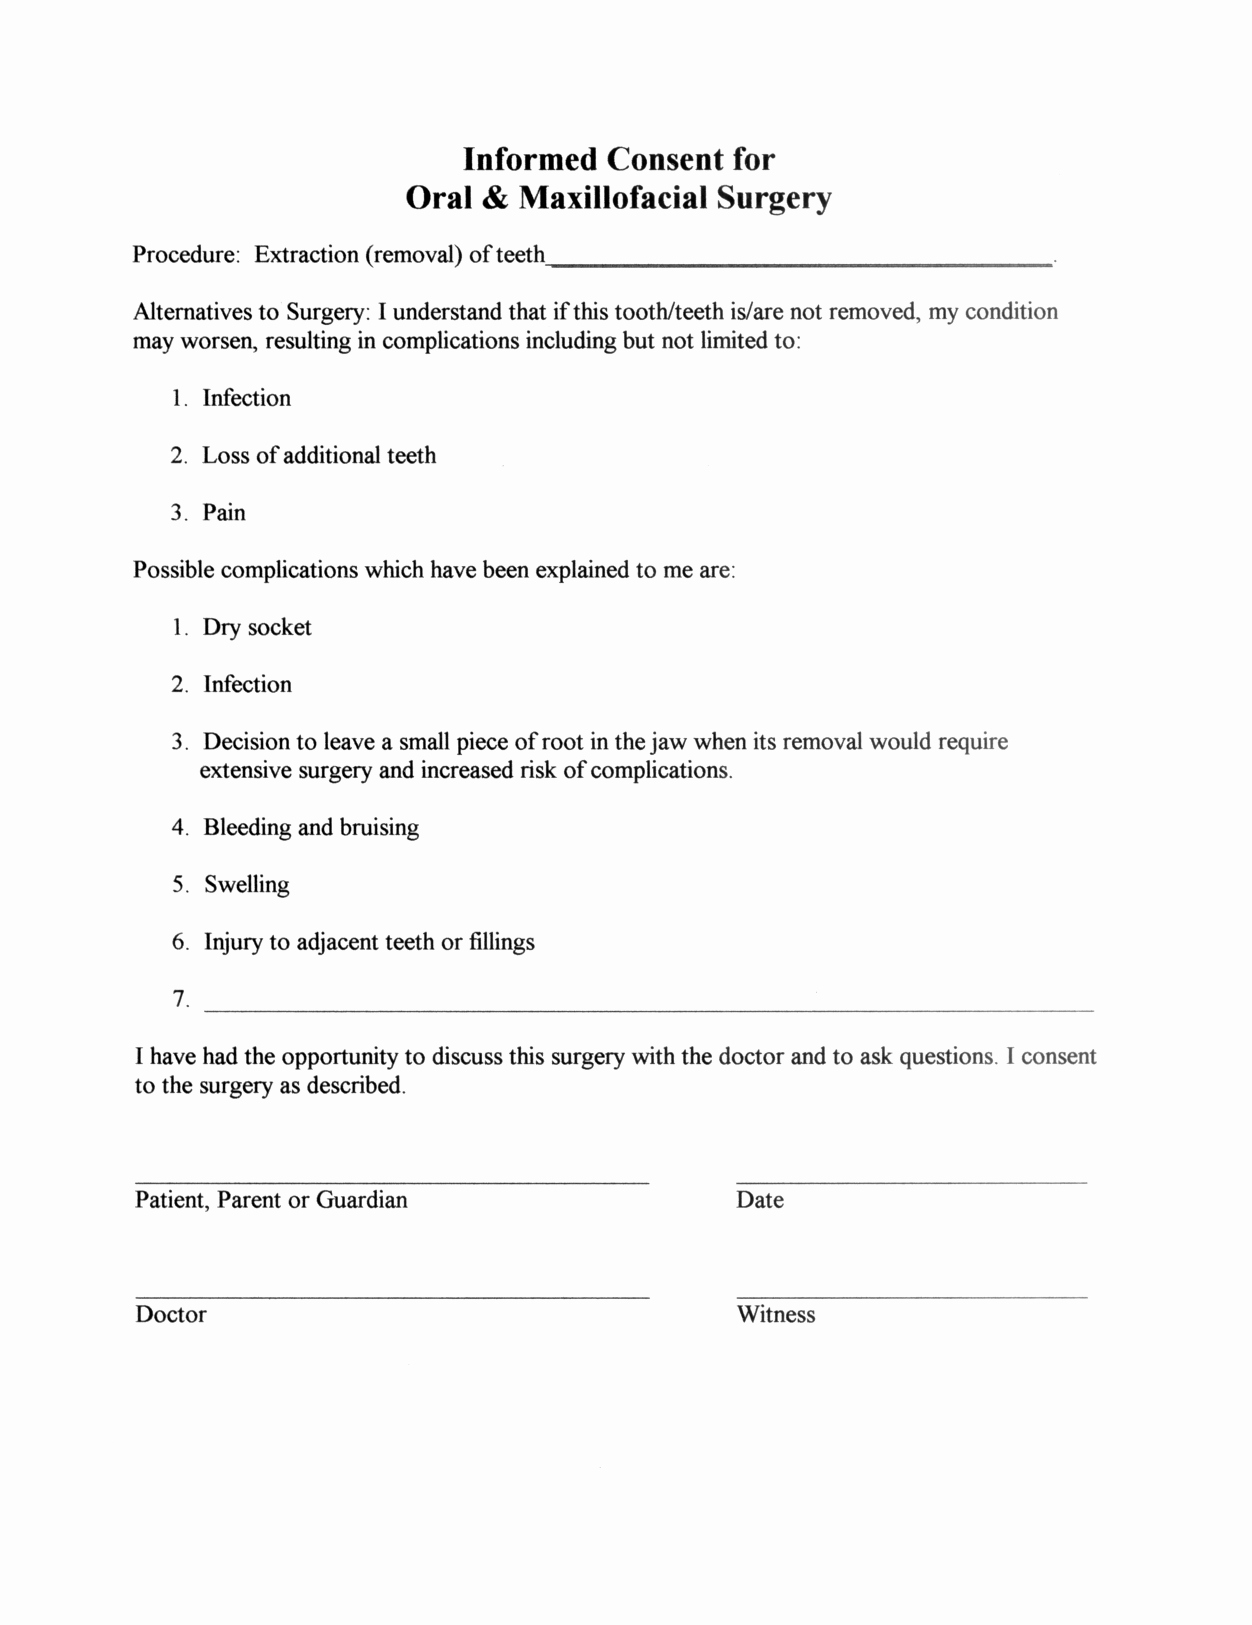 Medical Consent form Template Awesome Surgery Informed Consent form Template